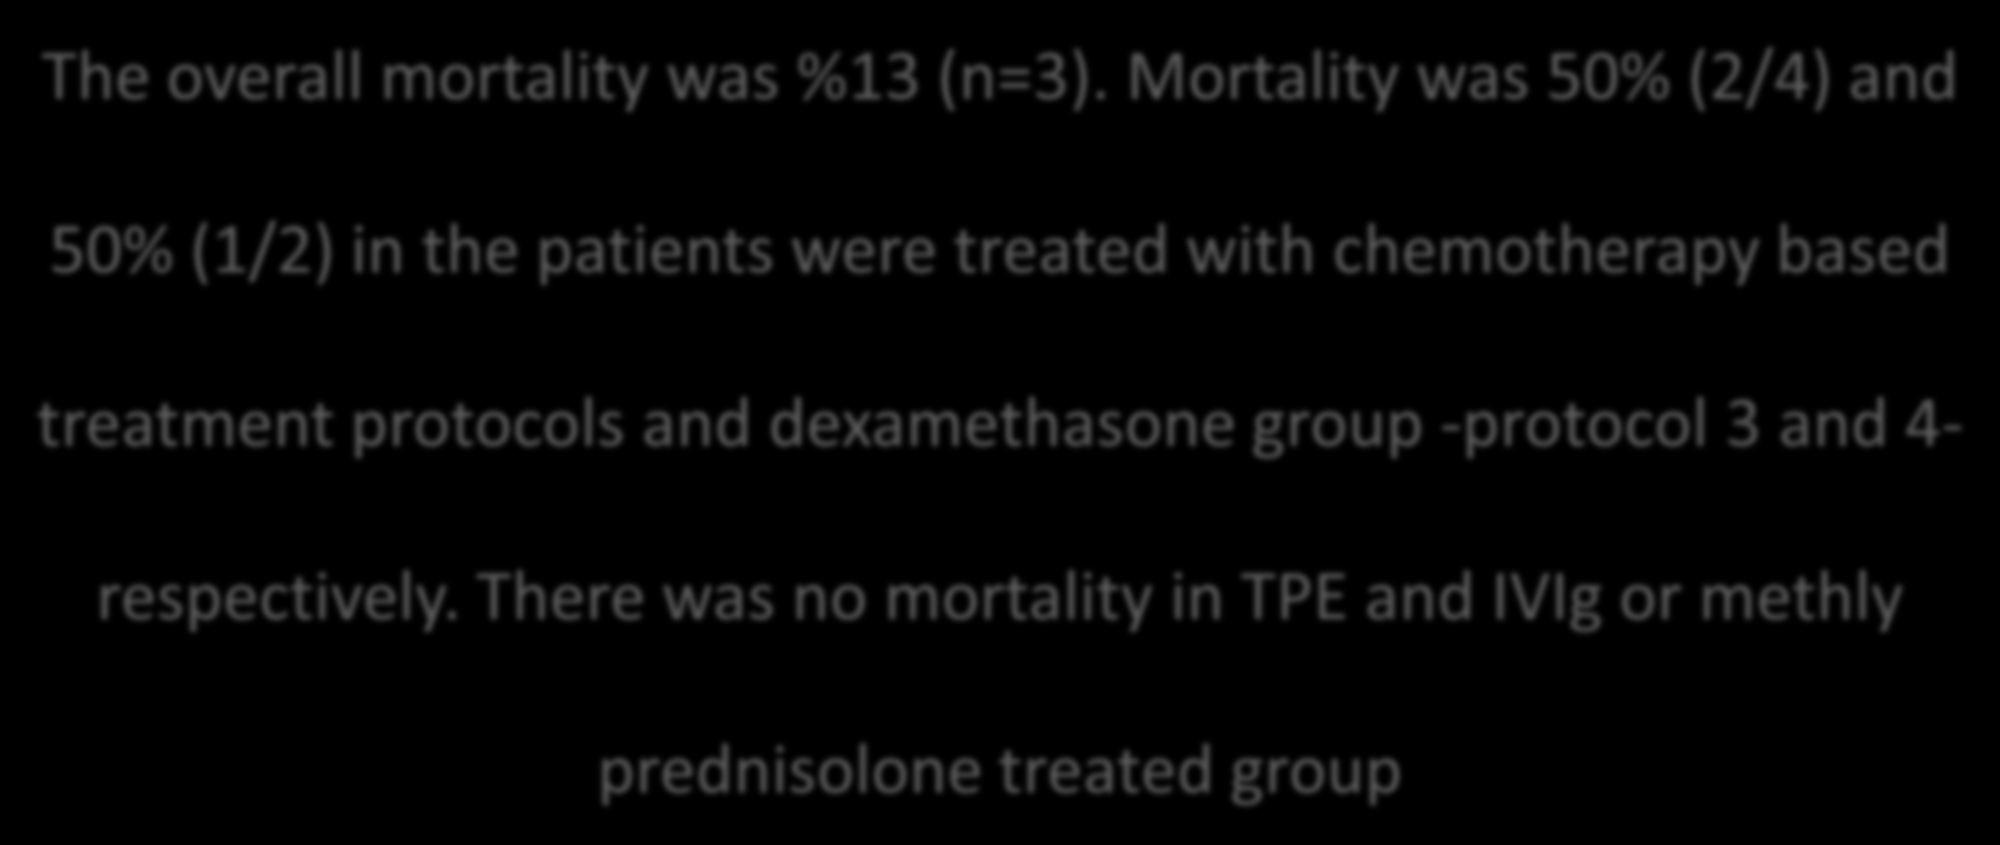 The treatment protocols and survival The overall mortality was %13 (n=3).